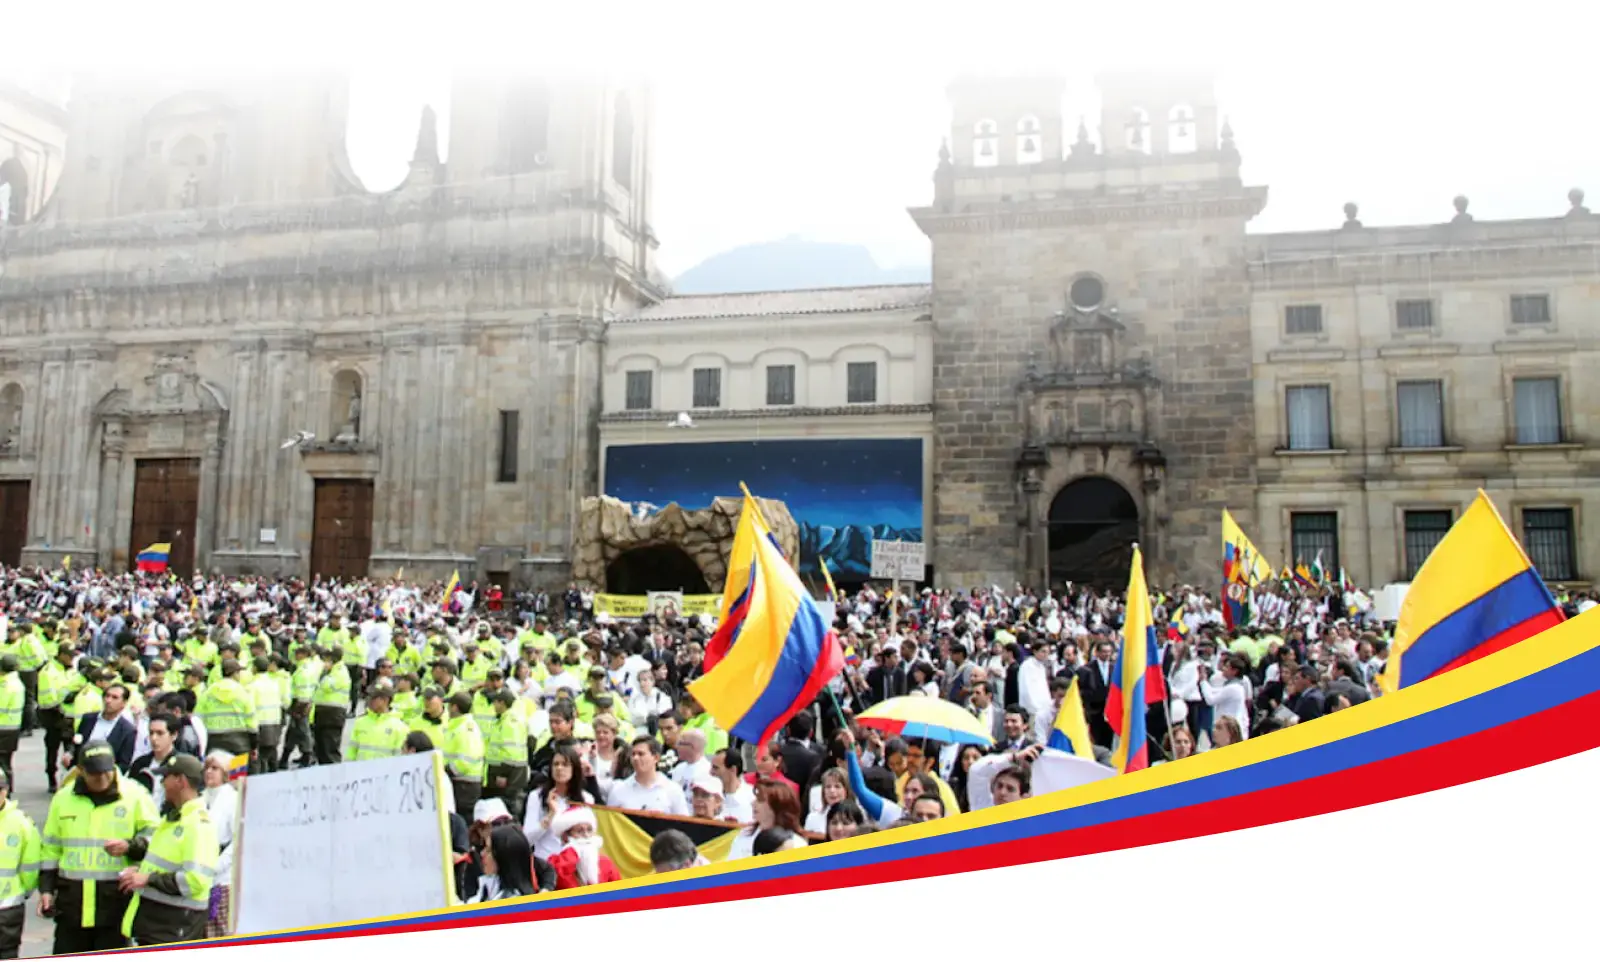 A large gathering of people in Colombia, many of them holding the Colombian flag, in front of a prominent federal building, possibly a cathedral or government structure, with law enforcement officials in the foreground.